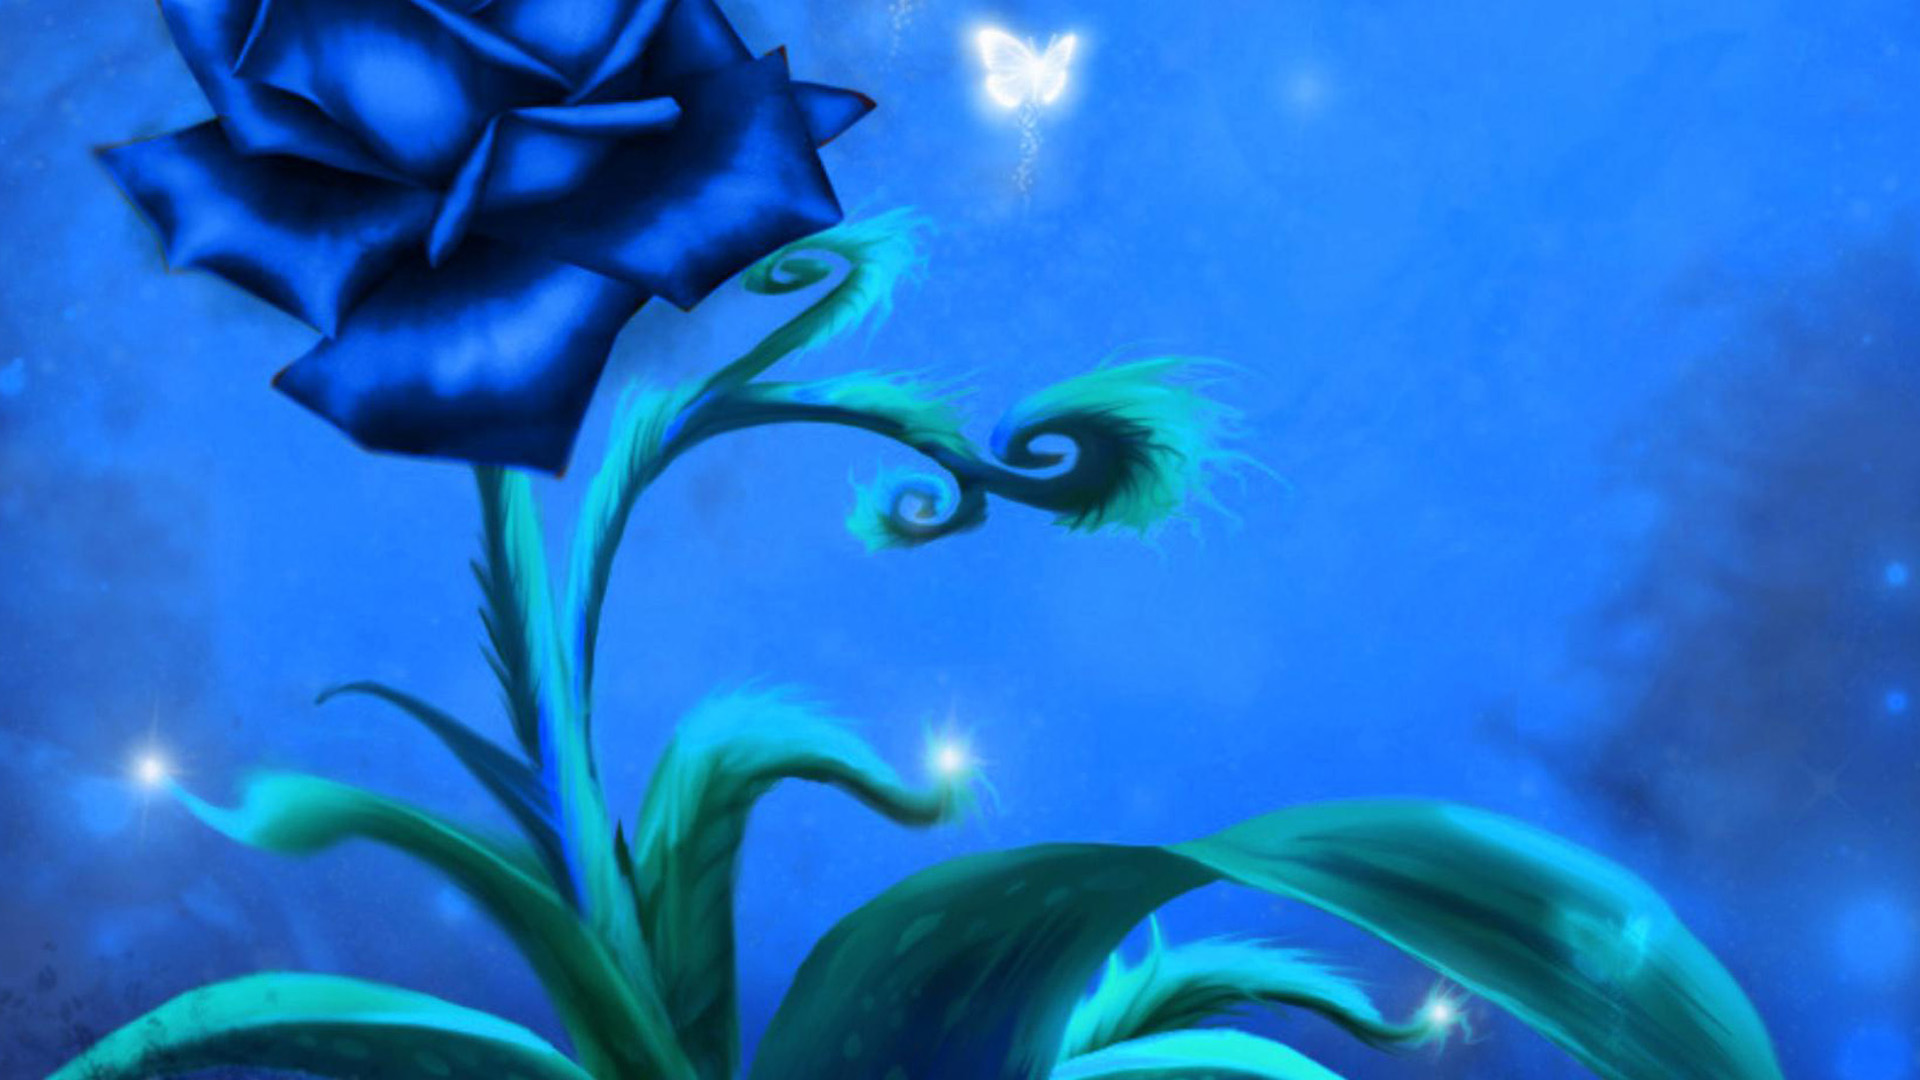 Blue Rose Wallpapers